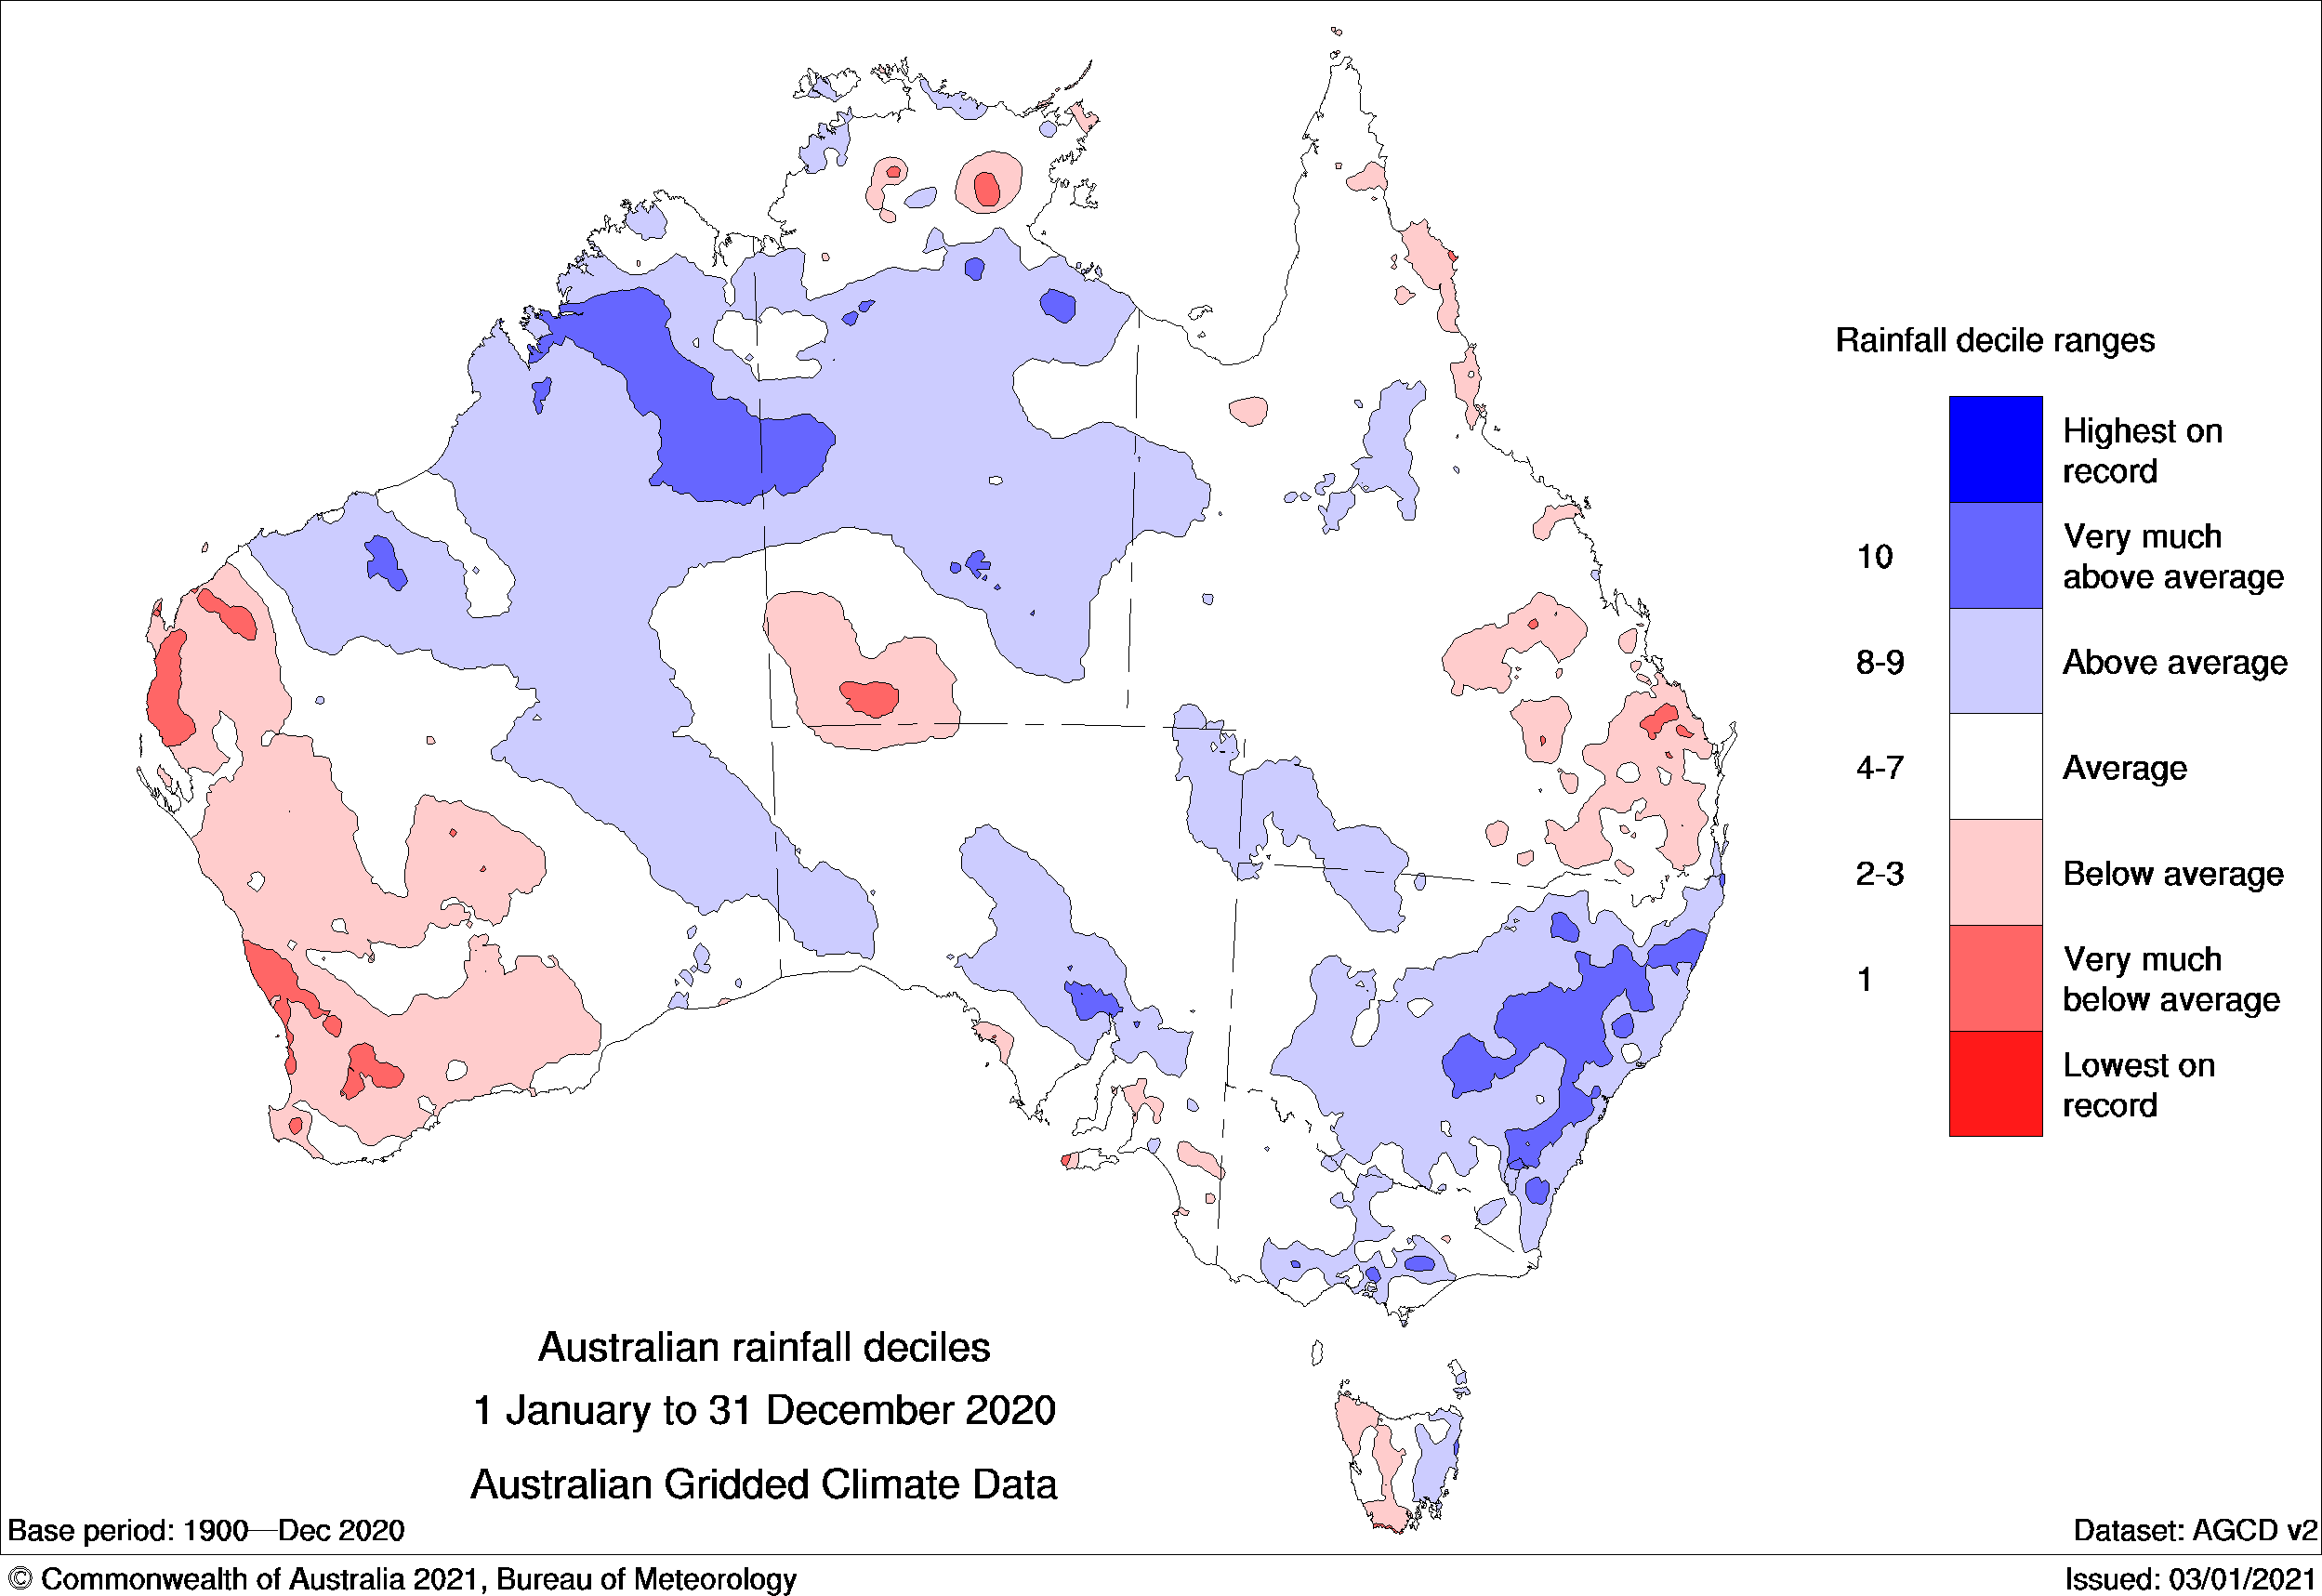 Map of Australia showing rainfall deciles for 2020 as described in text.